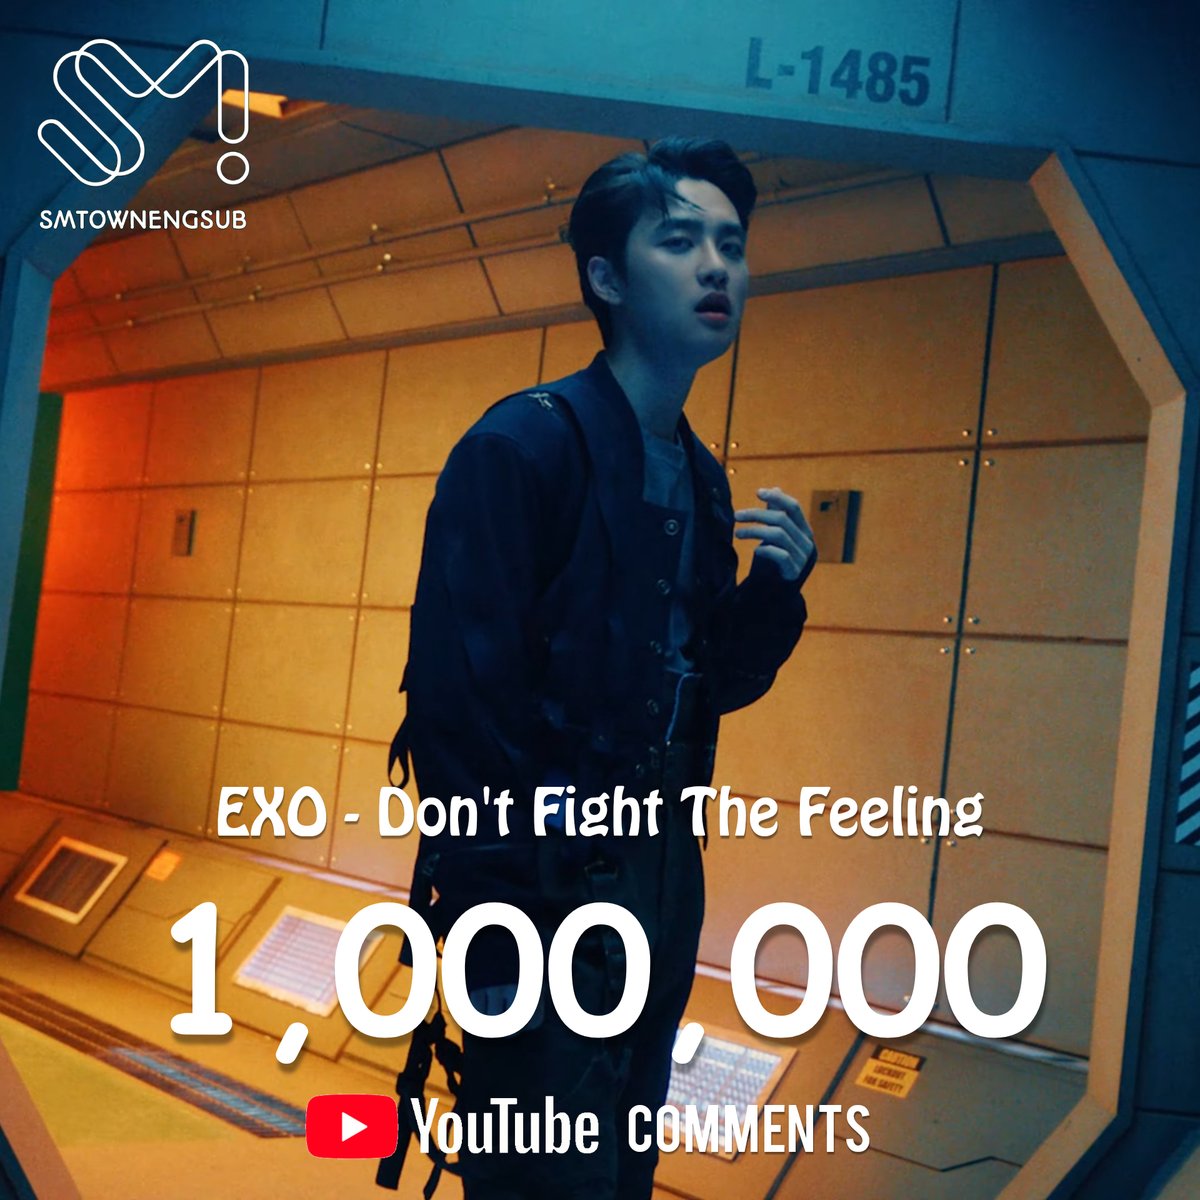 .@weareoneEXO 'Don't Fight The Feeling' becomes the fastest SM music video to hit 1,000,000 comments on YouTube (5 hours) #EXO_DFTFOutNow